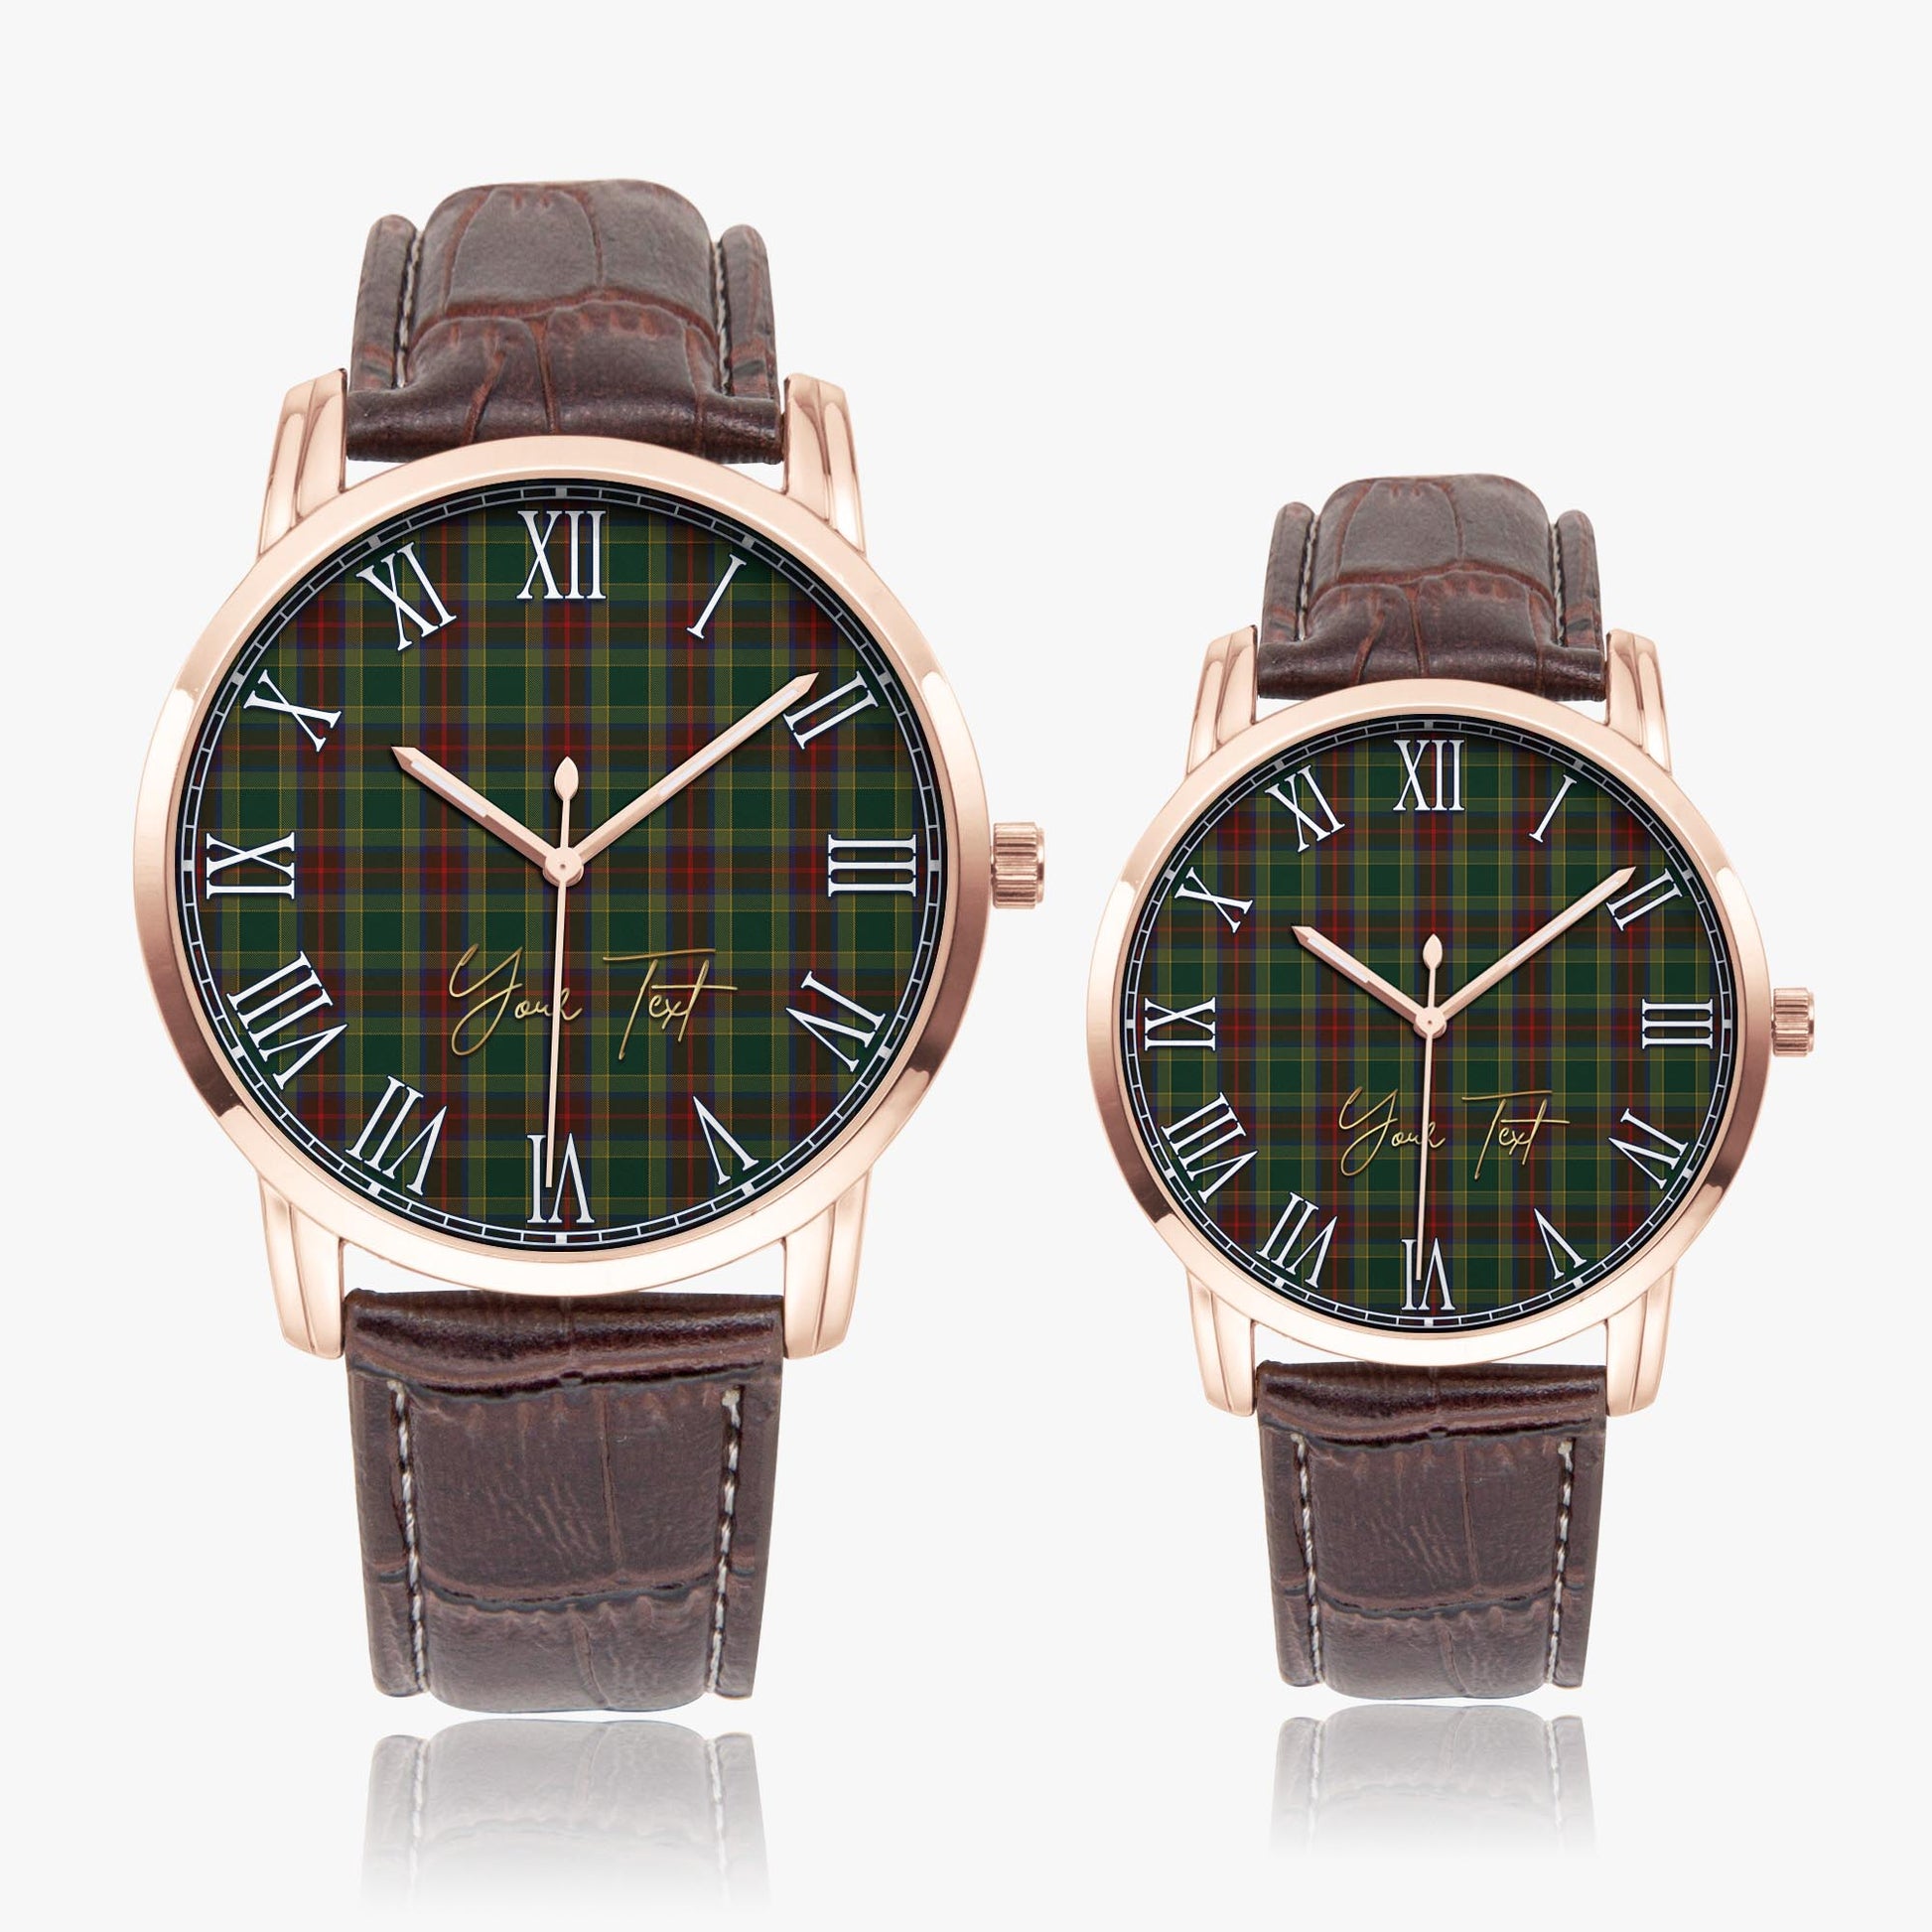 Waterford County Ireland Tartan Personalized Your Text Leather Trap Quartz Watch Wide Type Rose Gold Case With Brown Leather Strap - Tartanvibesclothing Shop